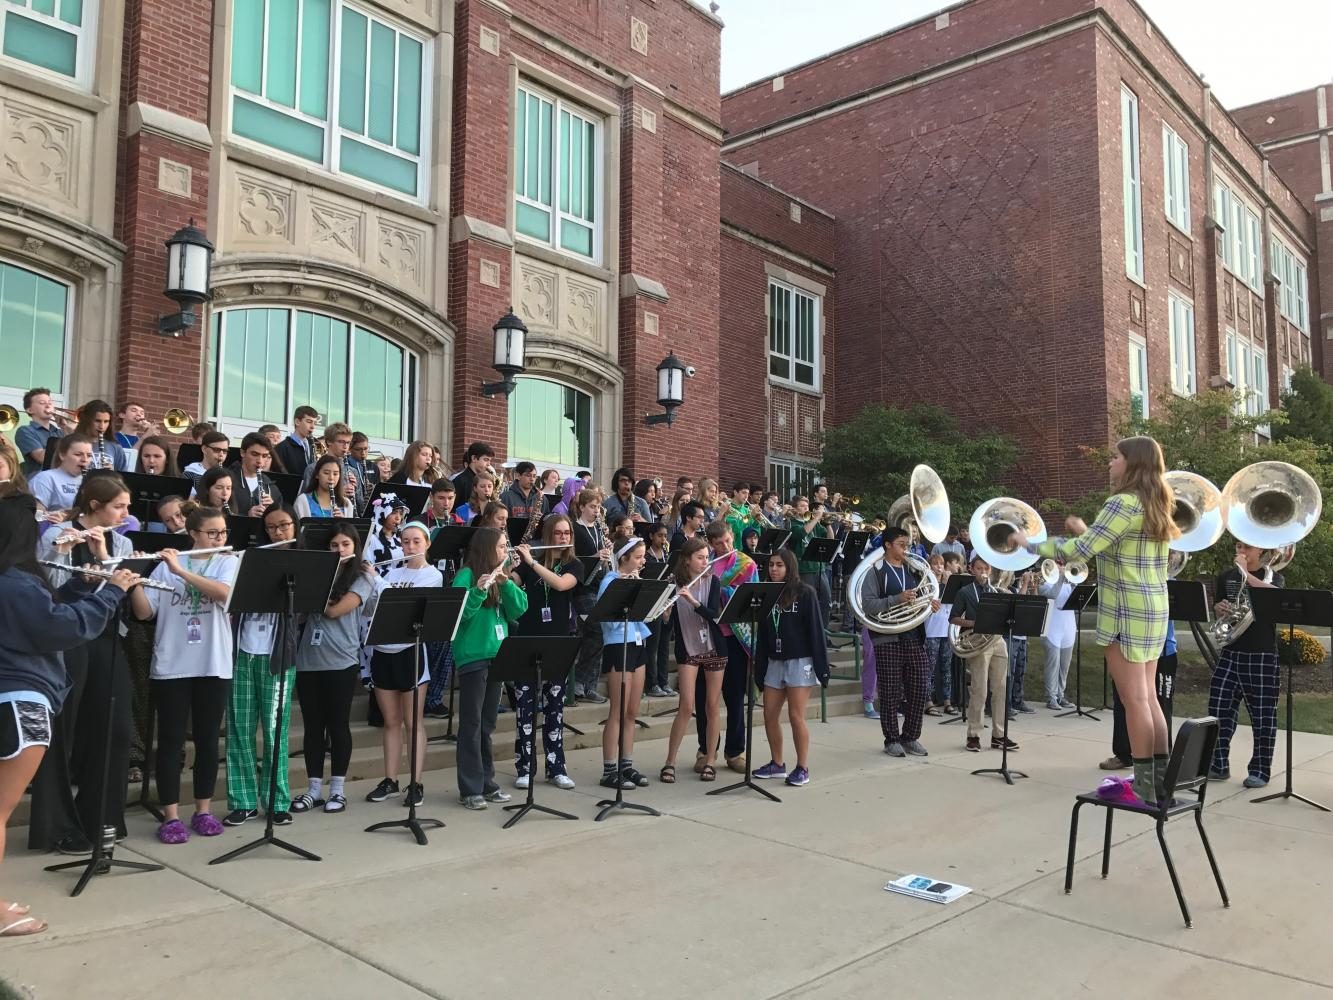 York marching band wears their pjs as they play in front of the main entrance to welcome students to school.  